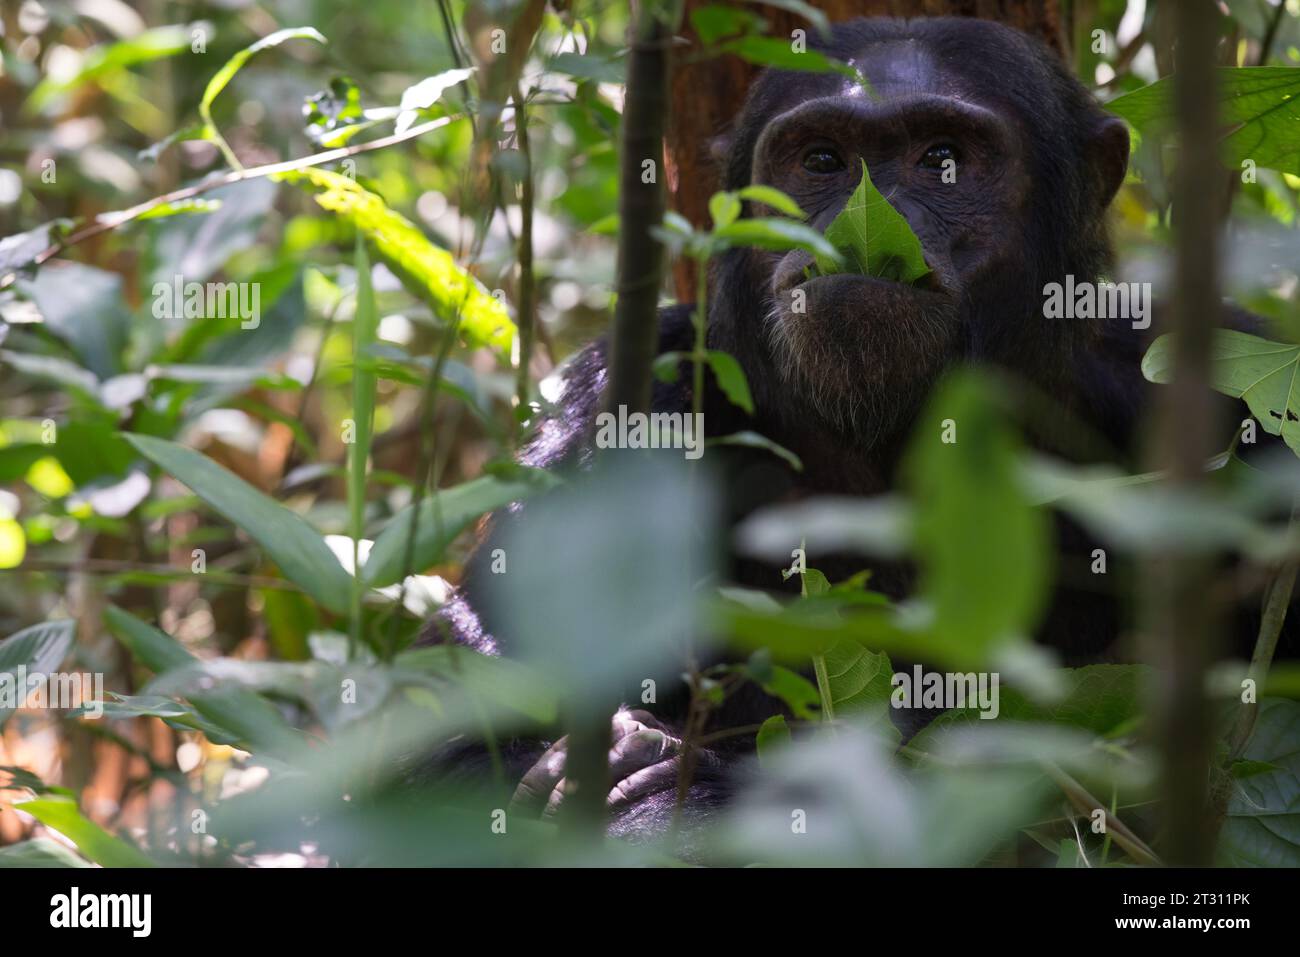 Adult chimpanzee relaxing against a tree and eating a leaf, Kibale forest, Uganda. Stock Photo